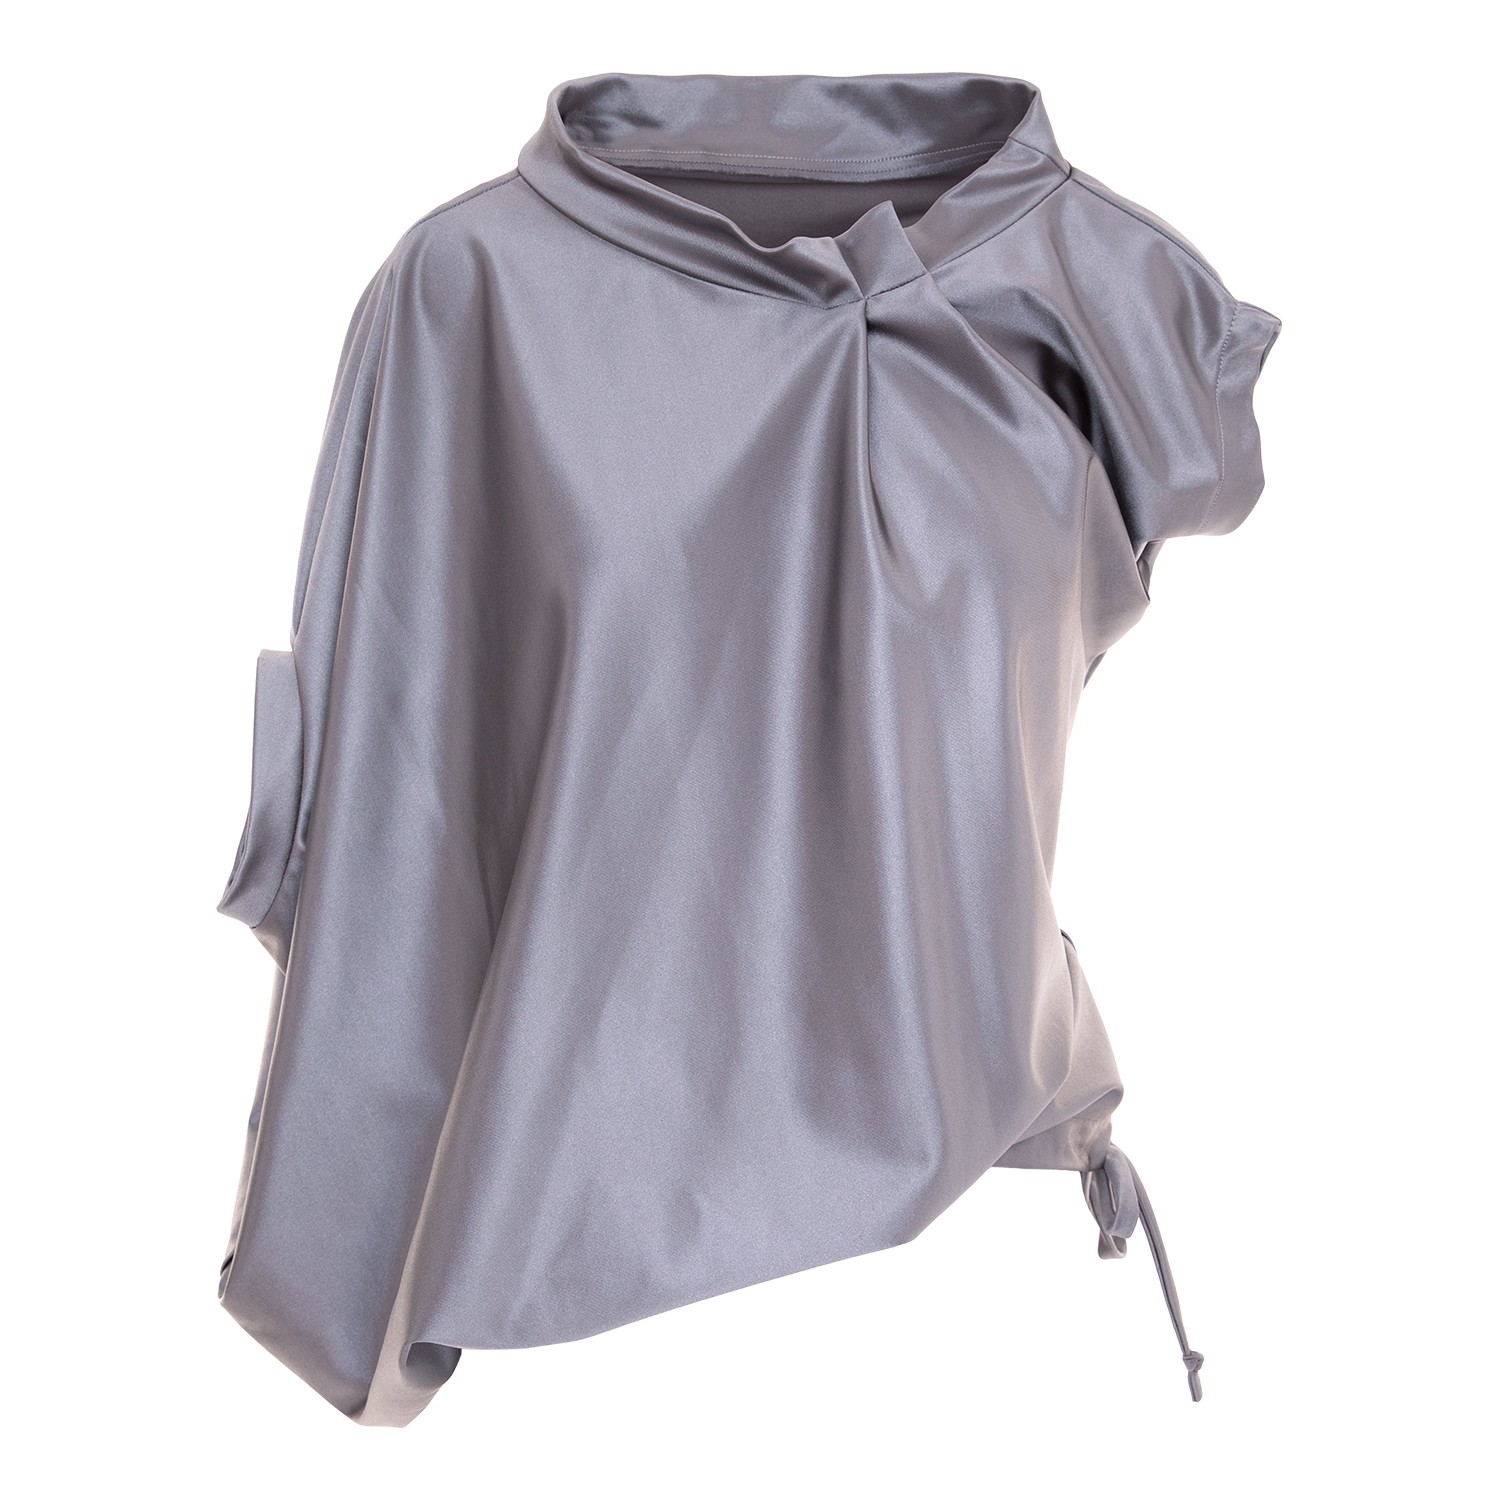 Women’s Grey / Silver Asymmetric Oversized Blouse With Pleated Collar Large Silvia Serban